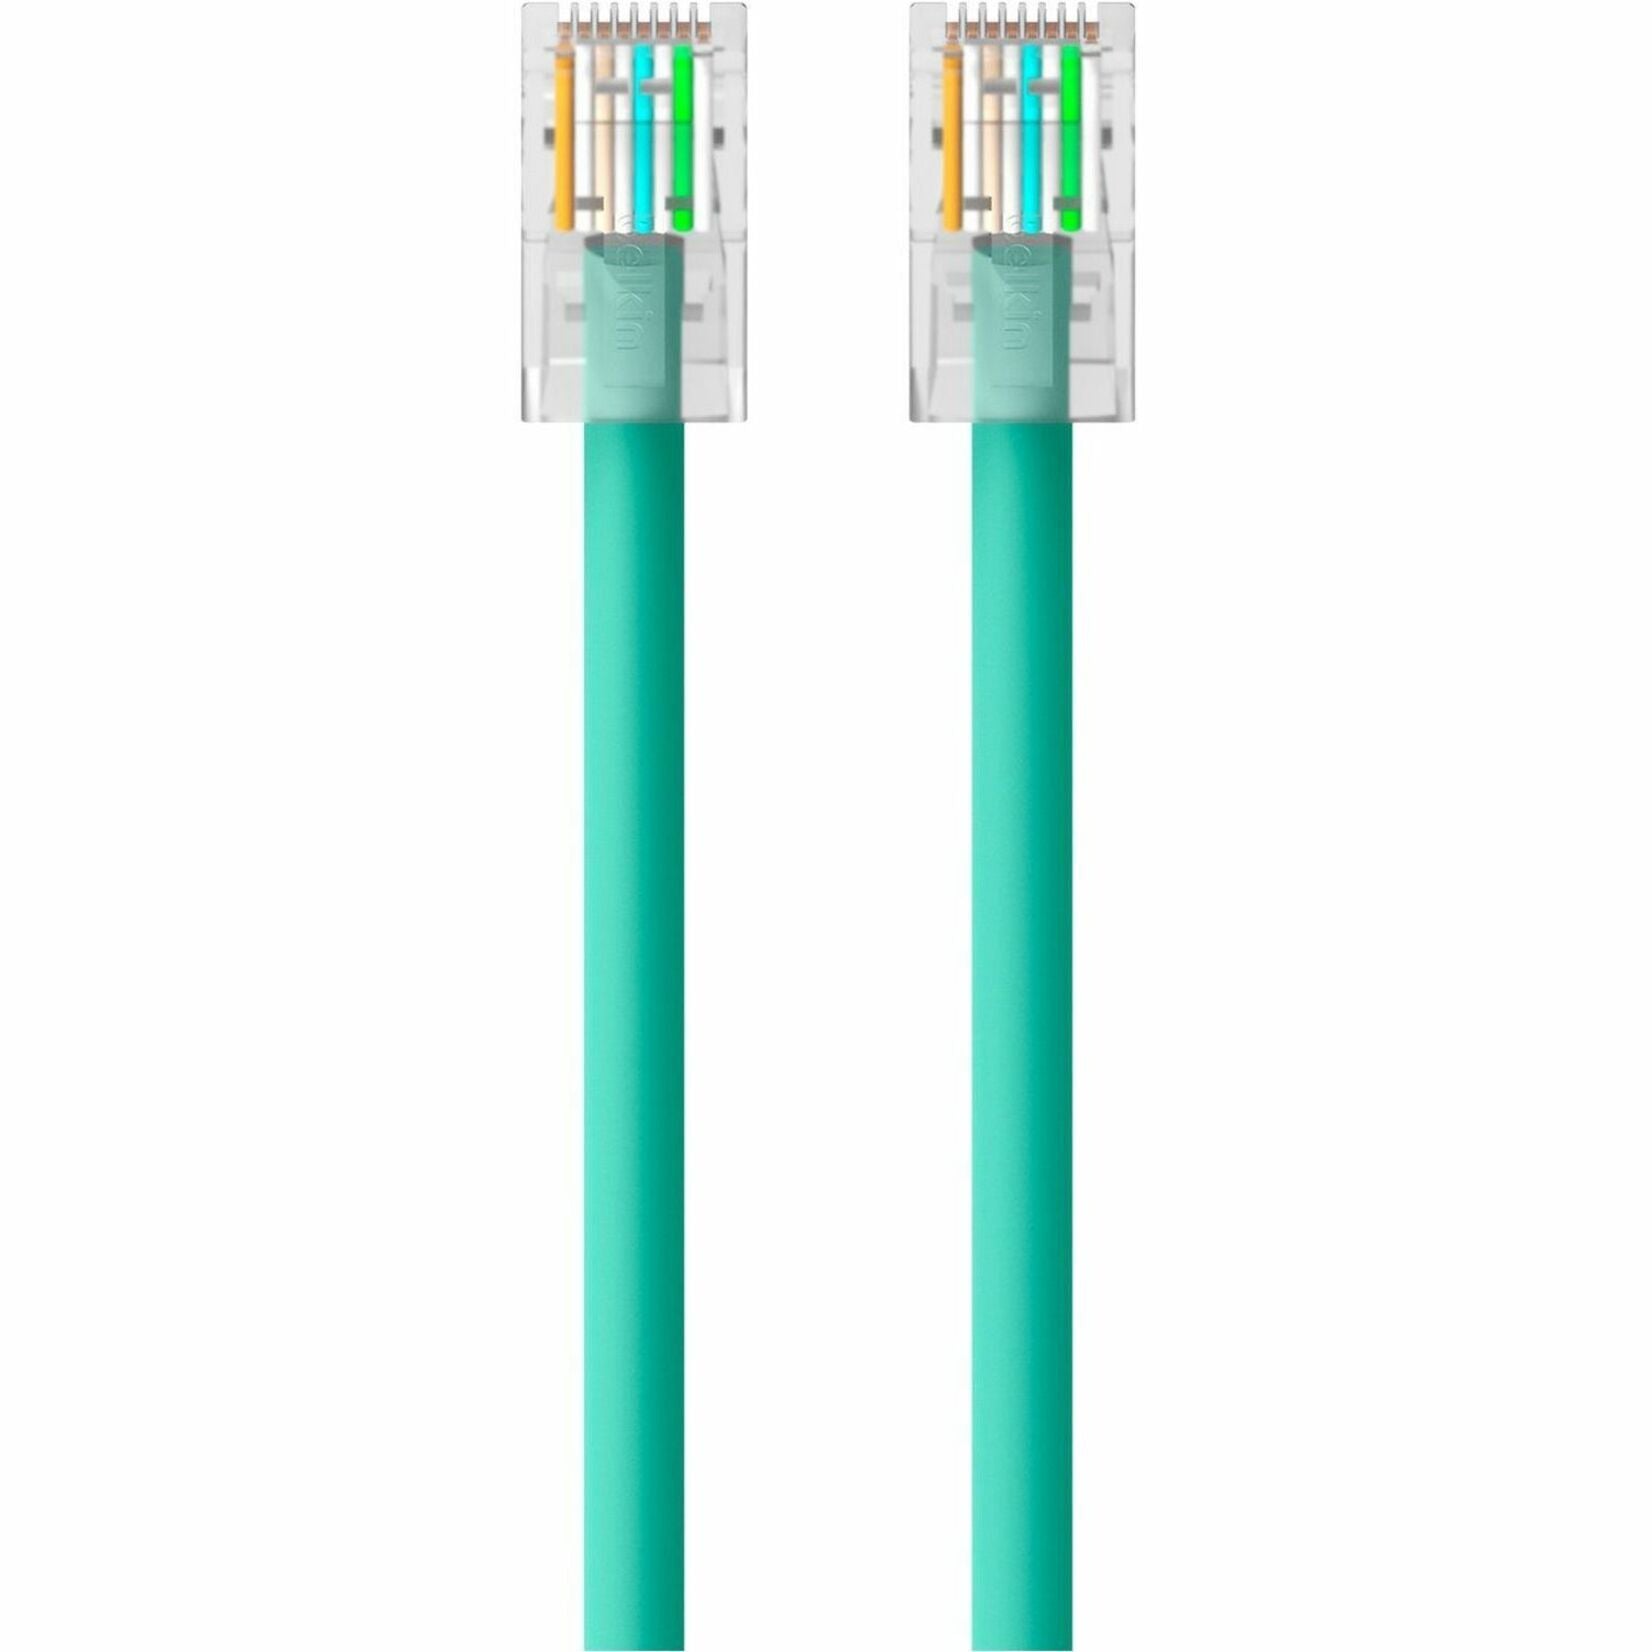 Belkin A3L980-15-GRN RJ45 Category 6 Snagless Patch Cable, 15ft, Green